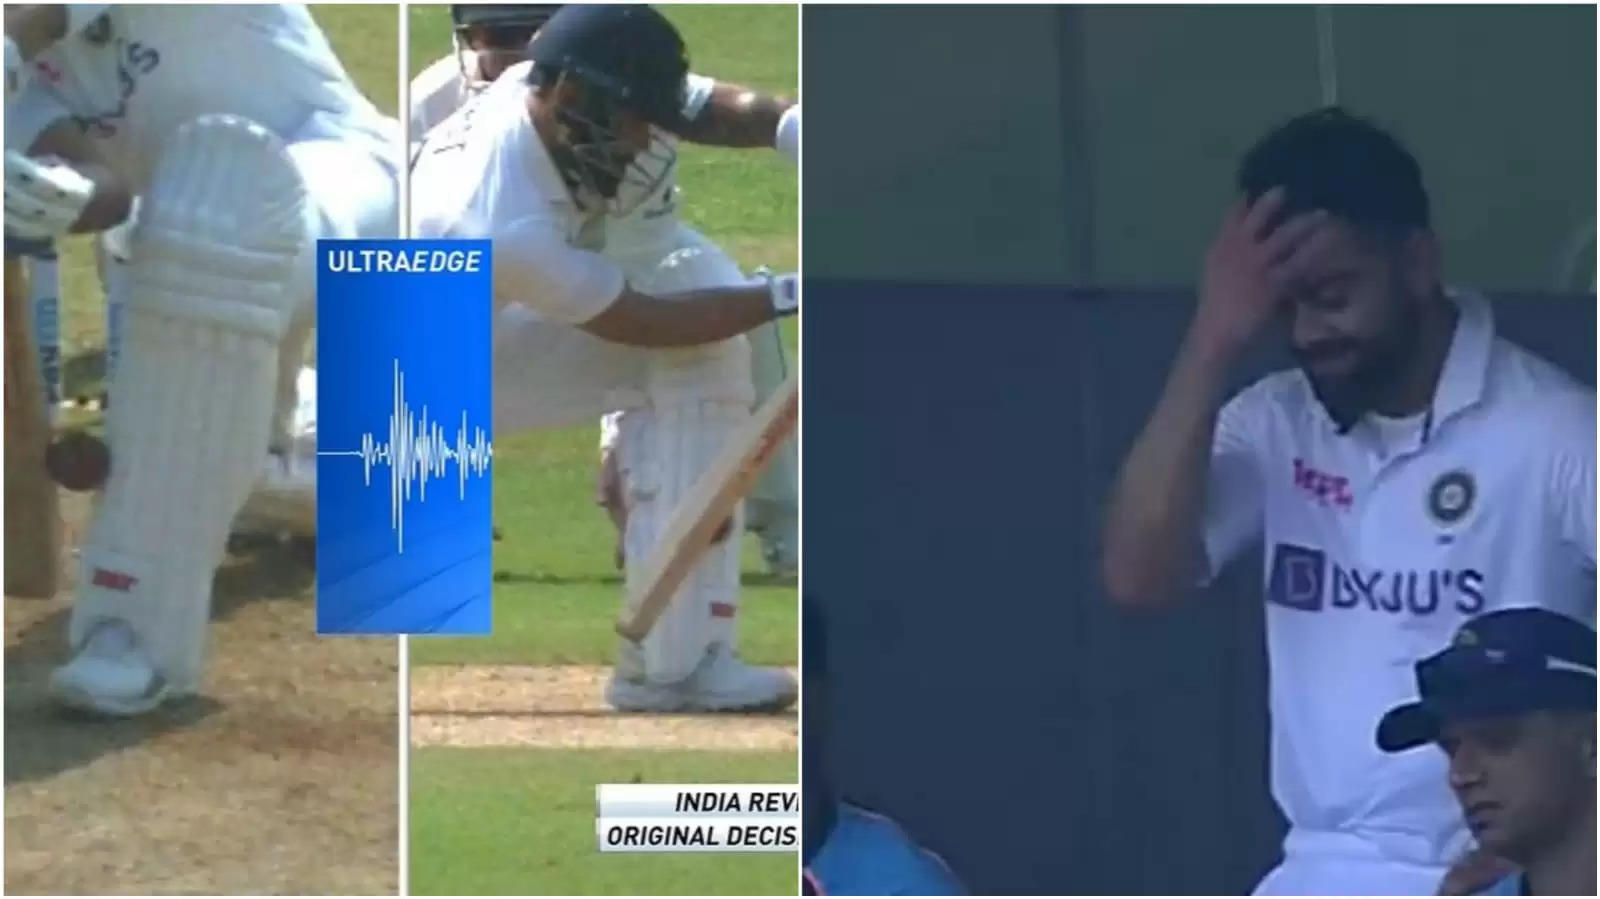 WATCH: Replays show that the third umpire got Virat Kohli’s controversial LBW call wrong